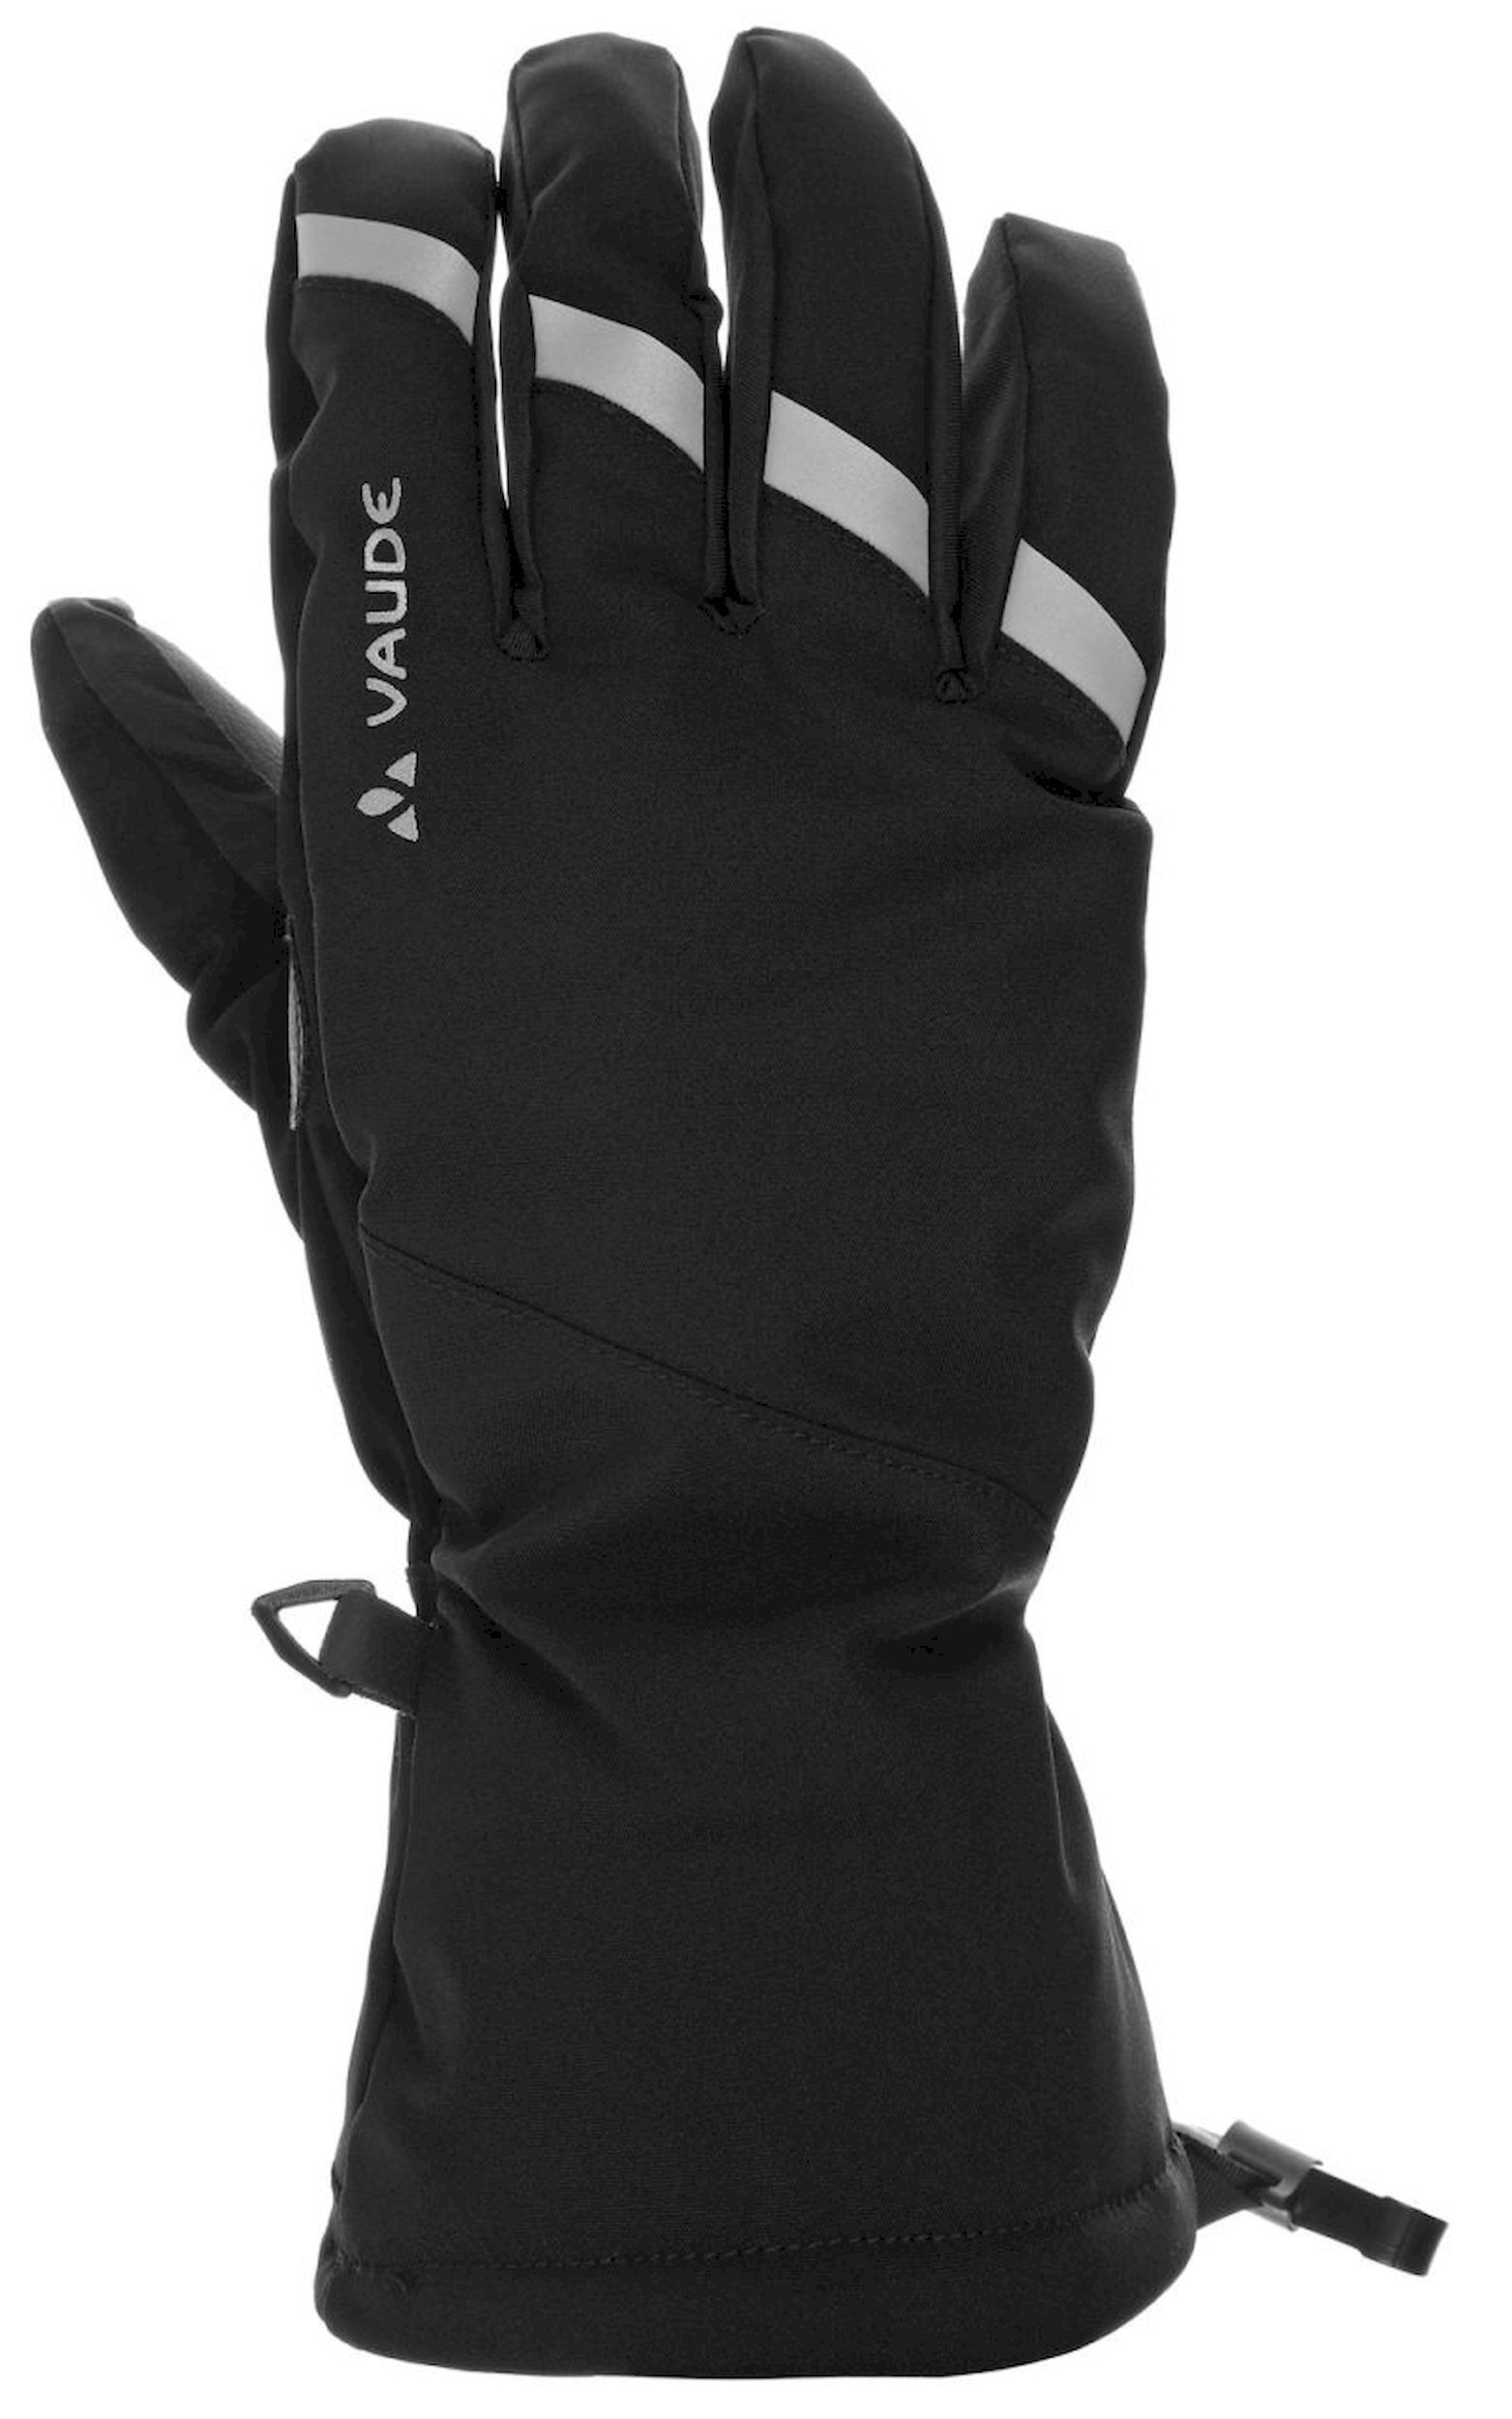 Vaude Tura Gloves II - Cycling gloves